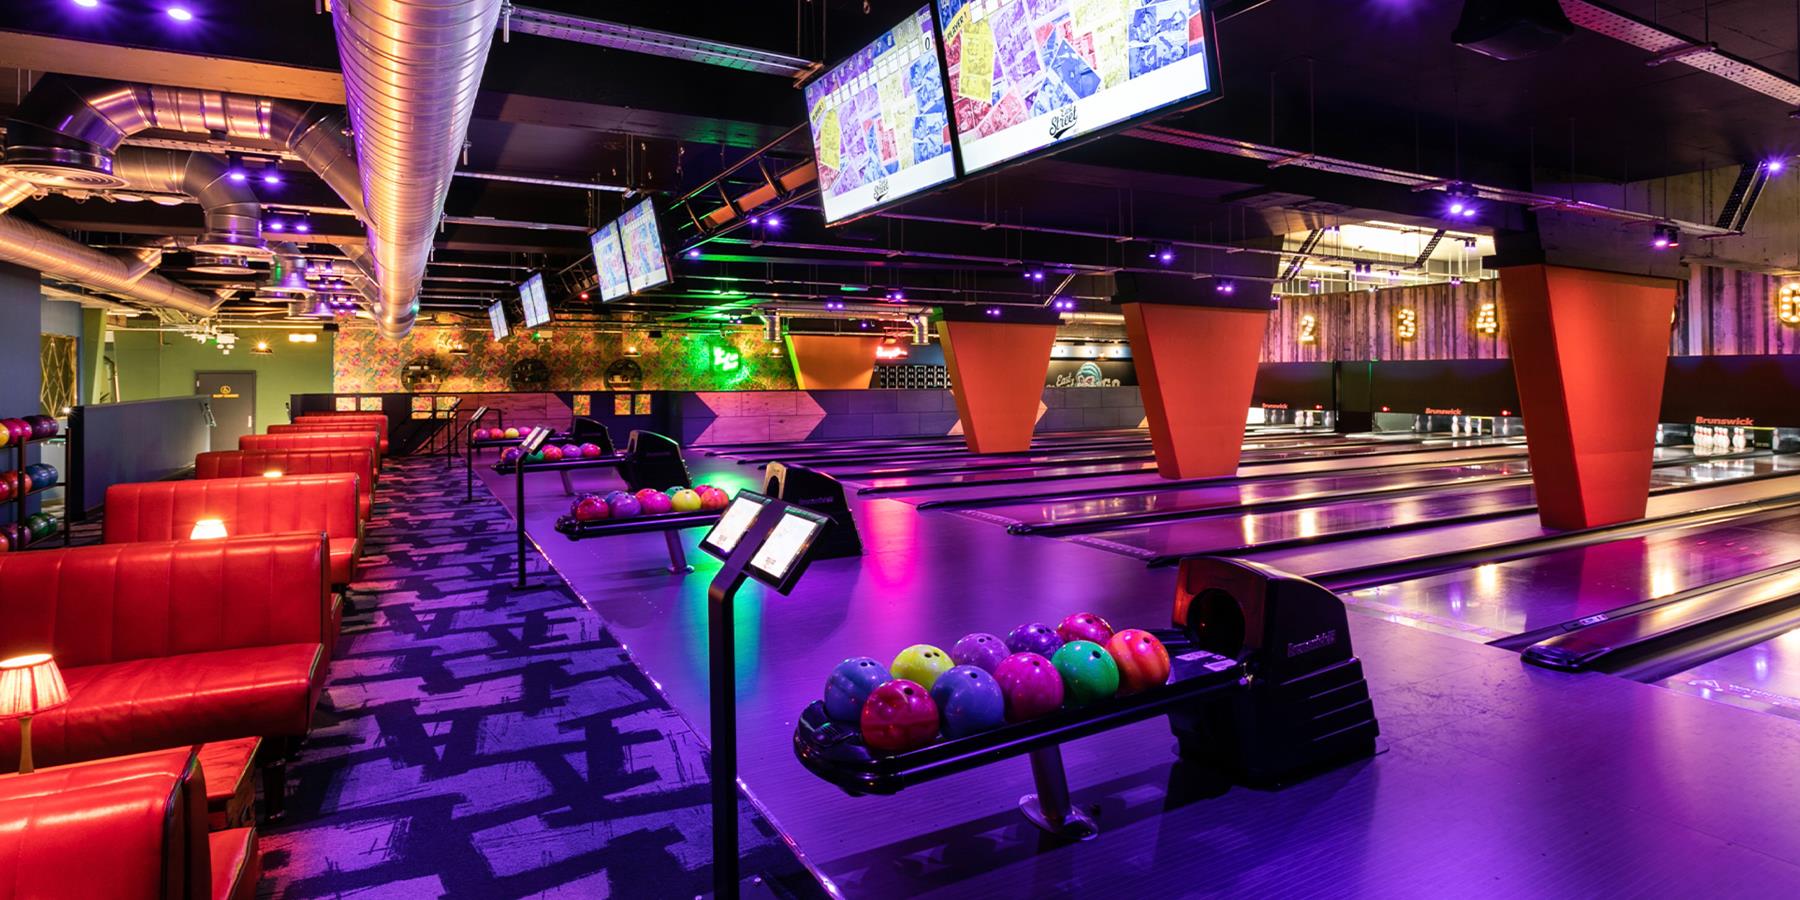 Get a strike at East Street Lanes boutique bowling alley - Visit Leicester